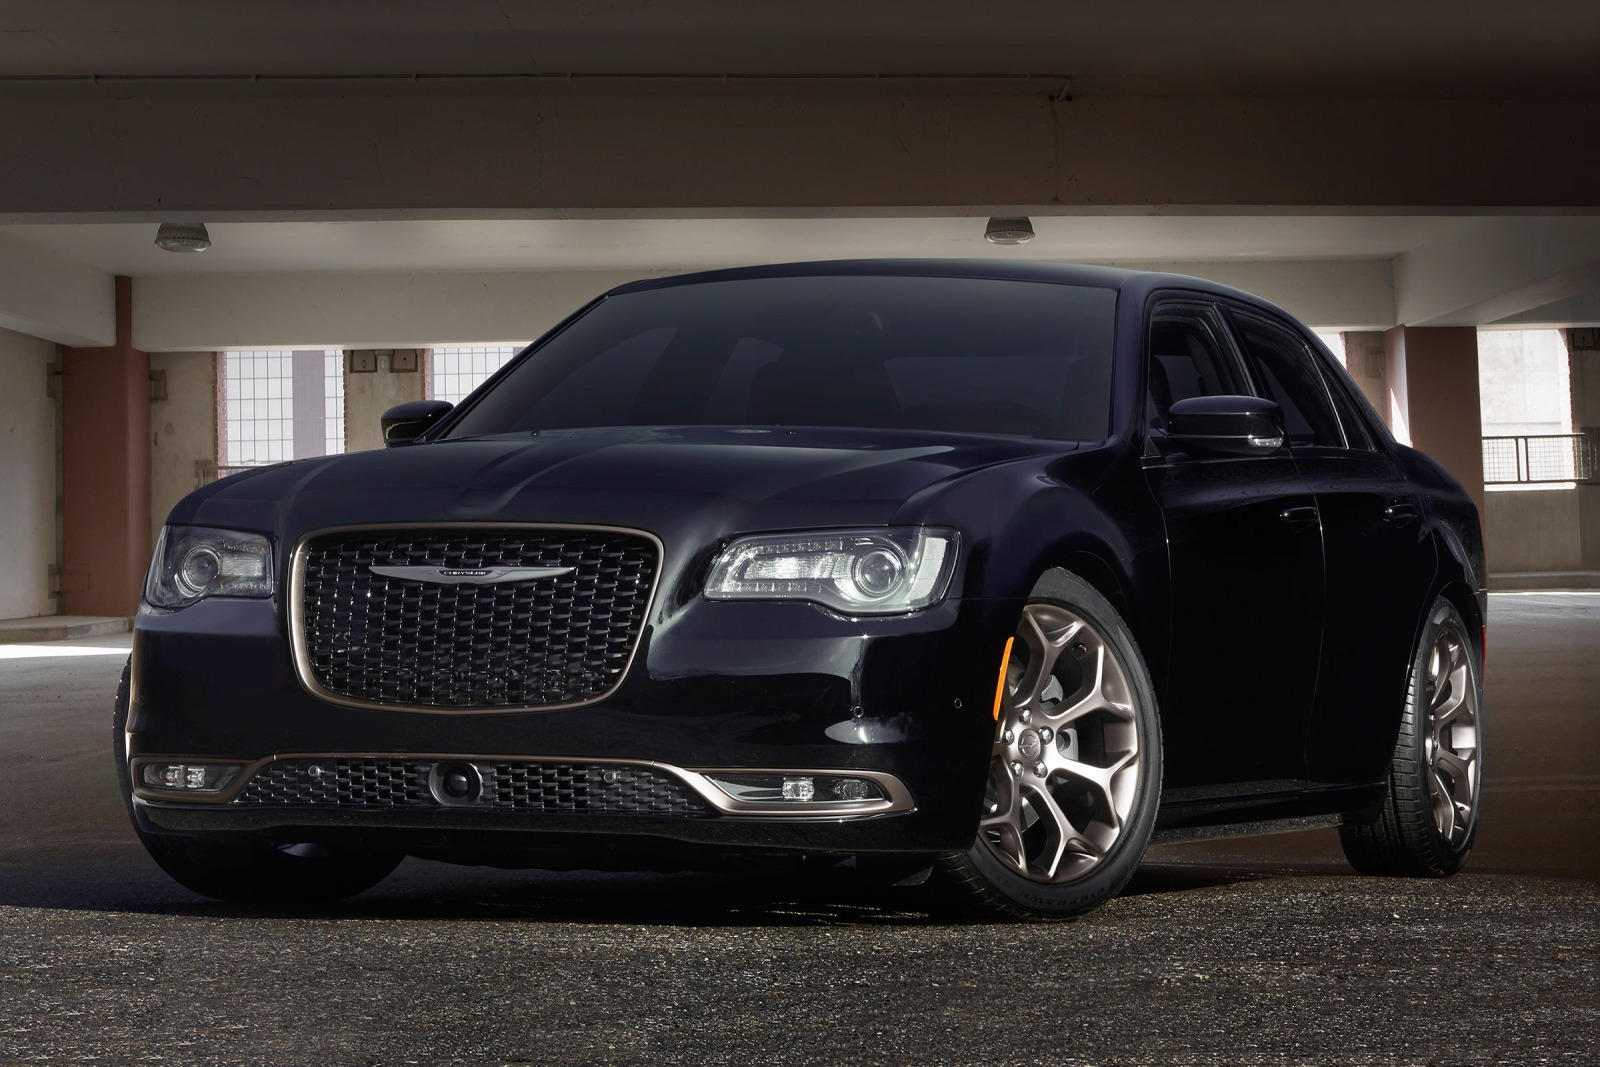 Used Chrysler 300 For Sale in Hollywood, FL CarBuzz